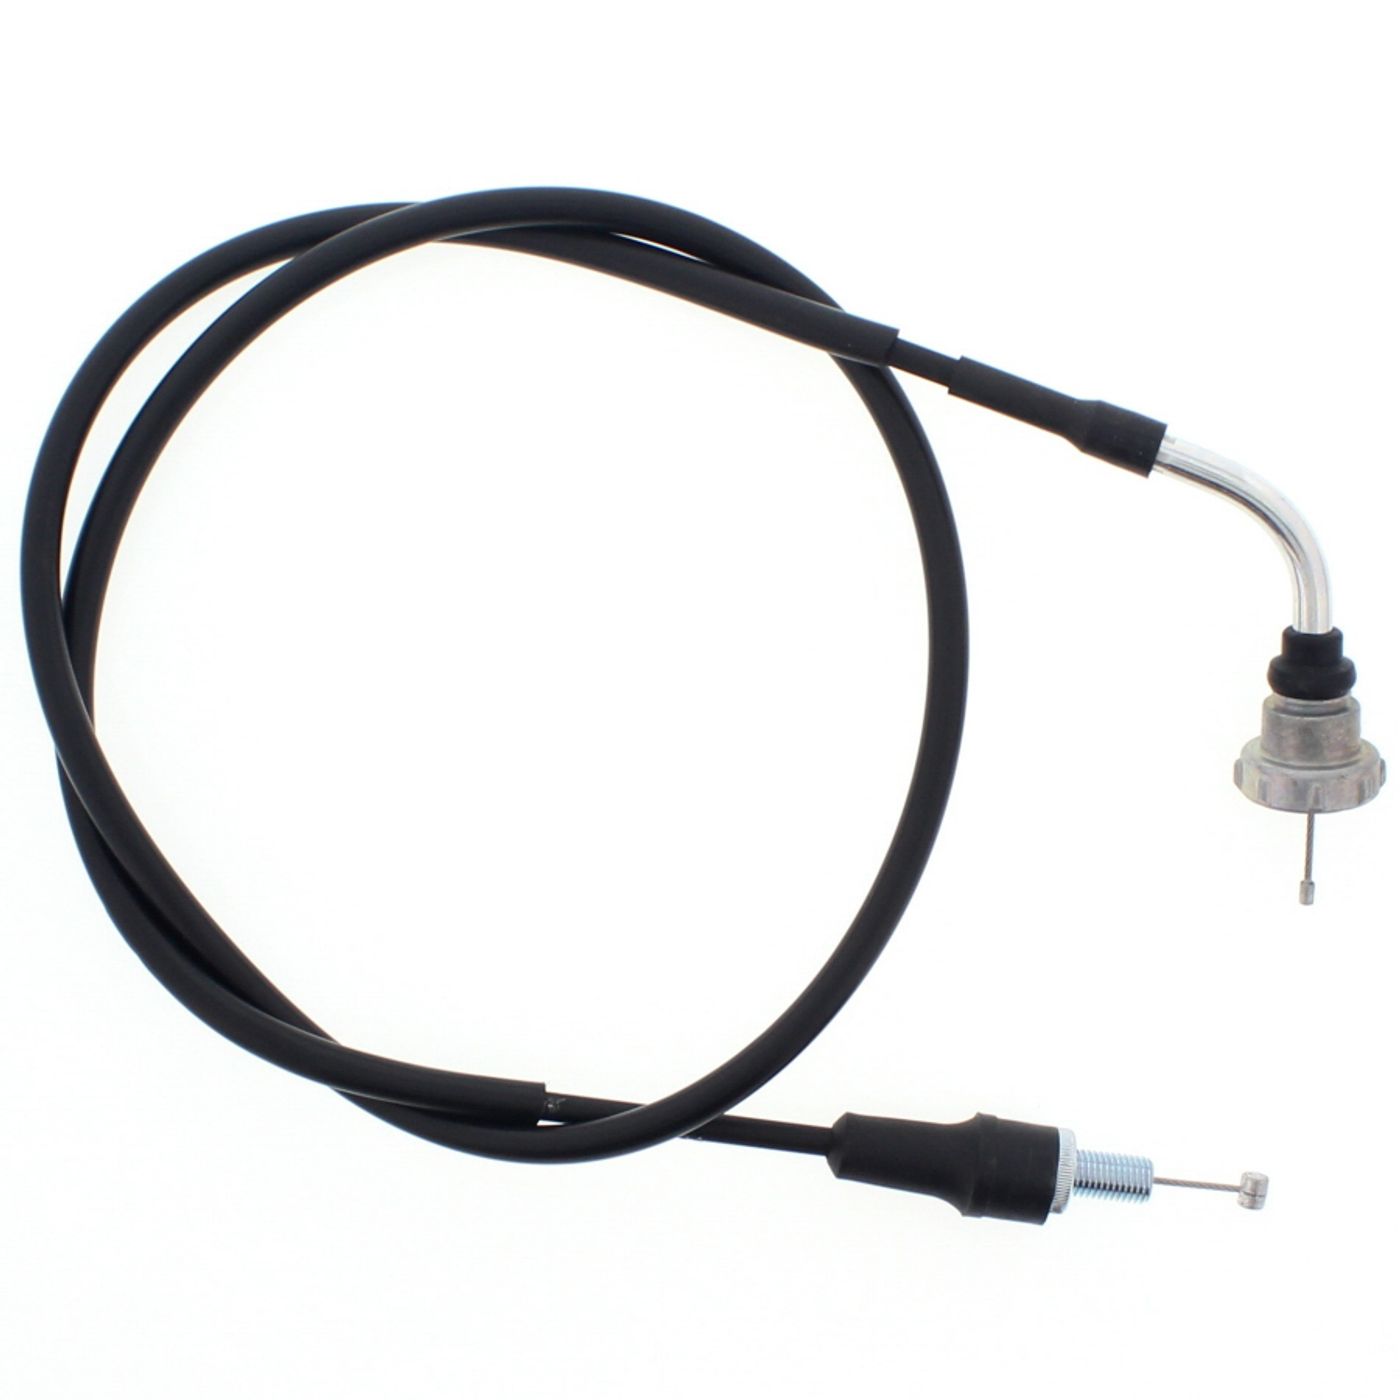 Wrp Throttle Cables - WRP451027 image